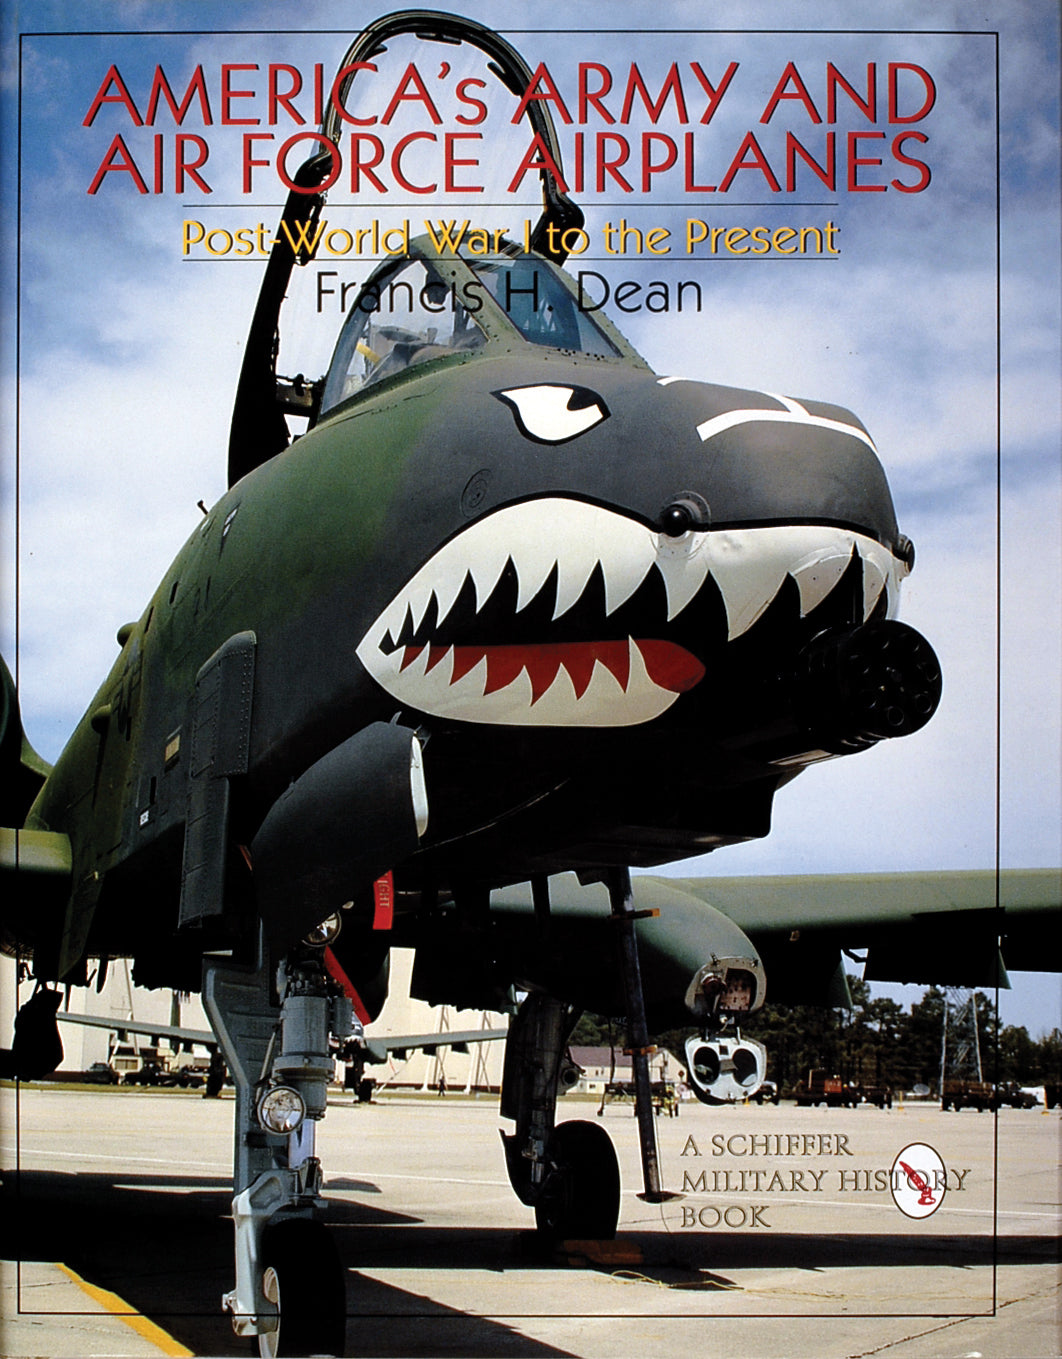 America's Army and Air Force Airplanes